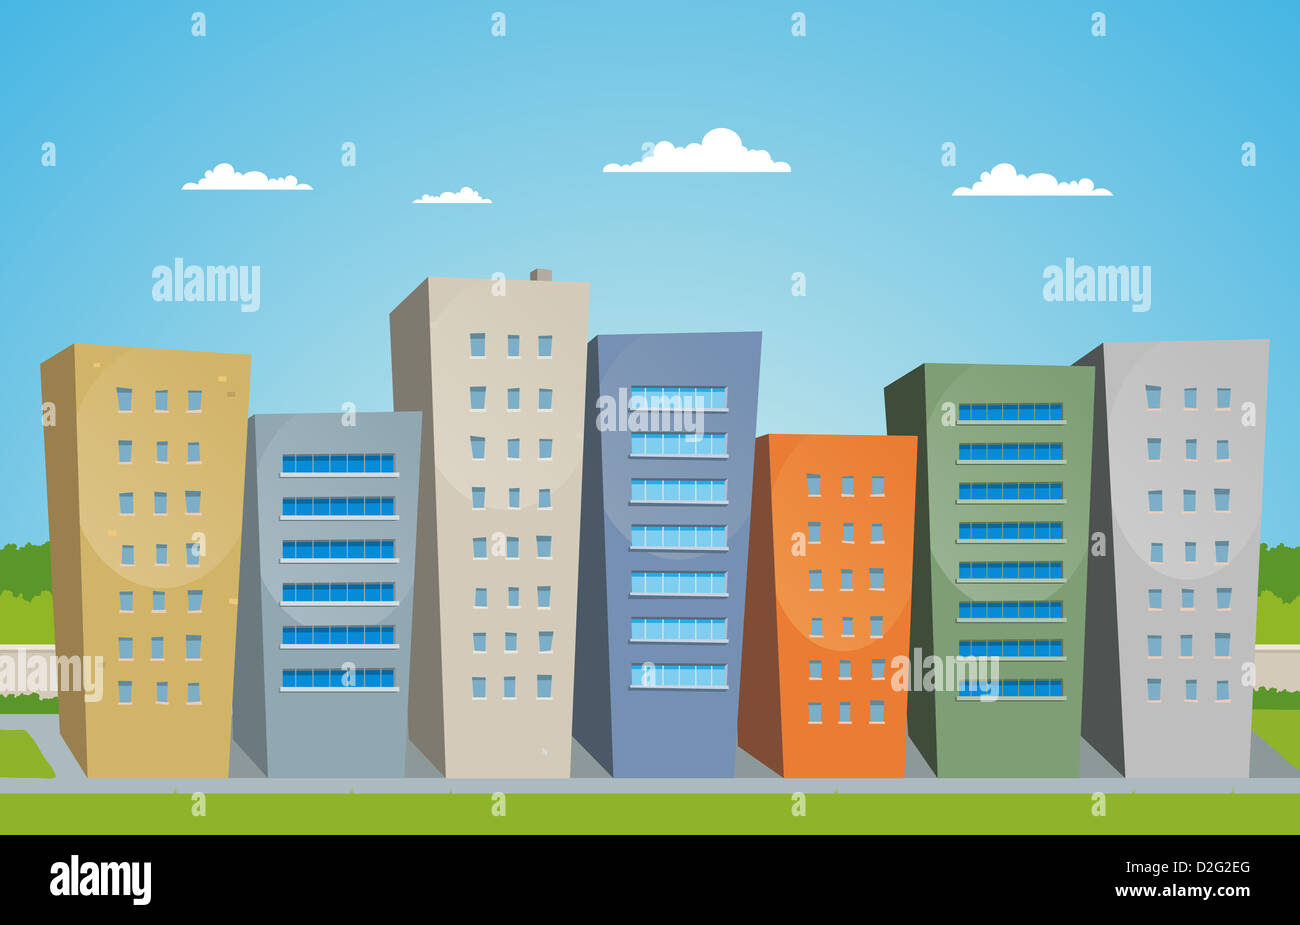 Illustration of cartoon styled street with buildings Stock Photo